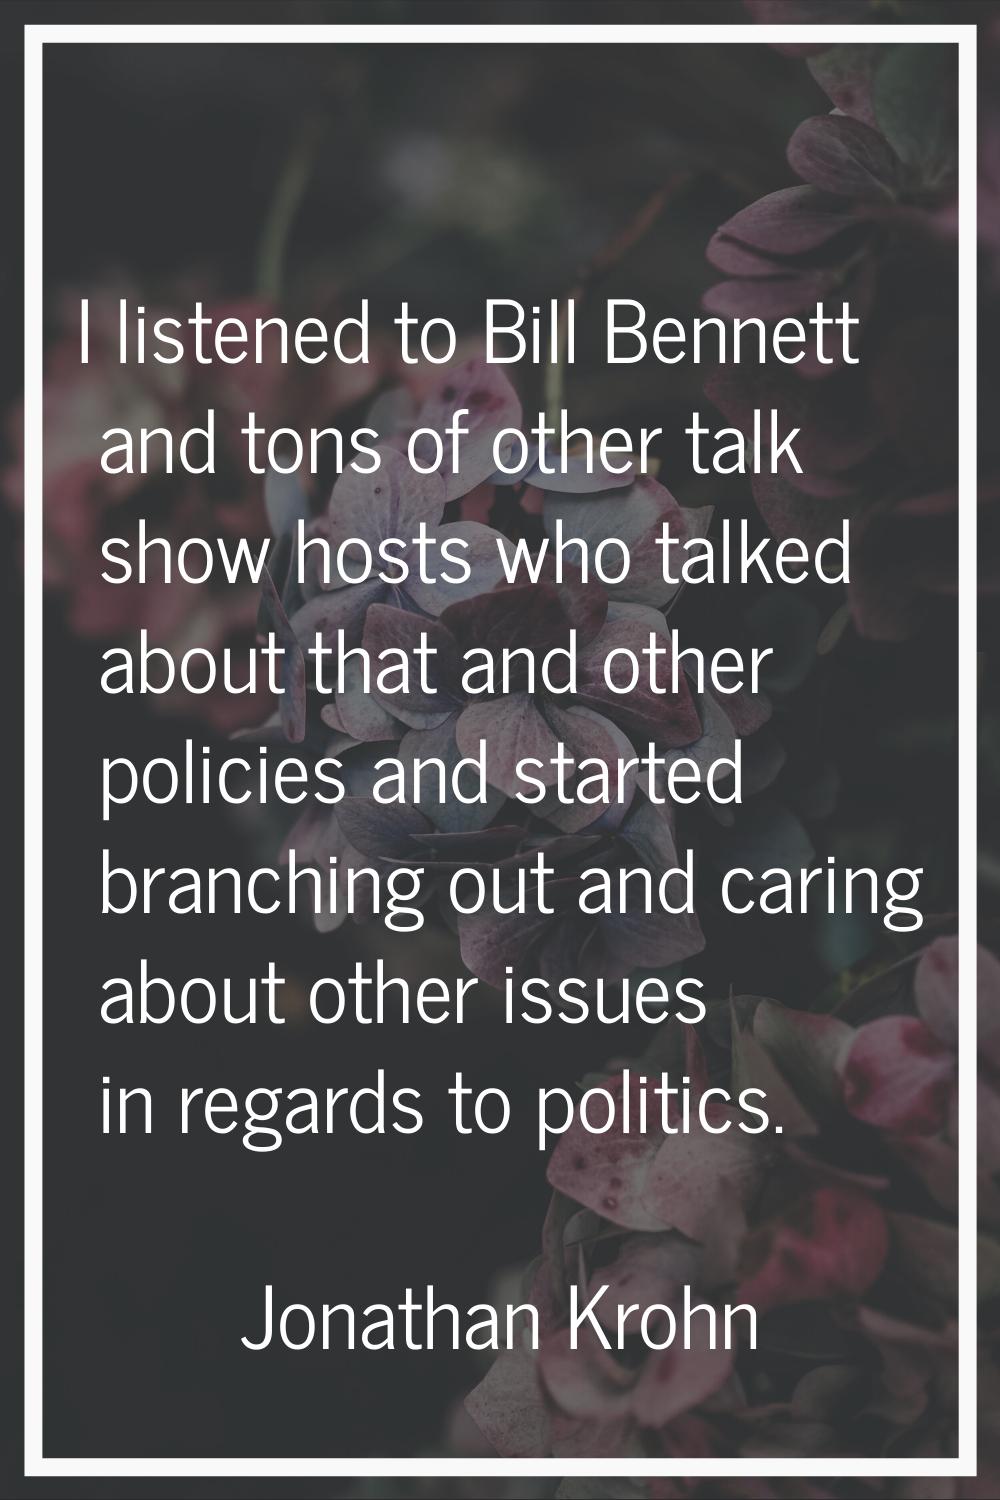 I listened to Bill Bennett and tons of other talk show hosts who talked about that and other polici